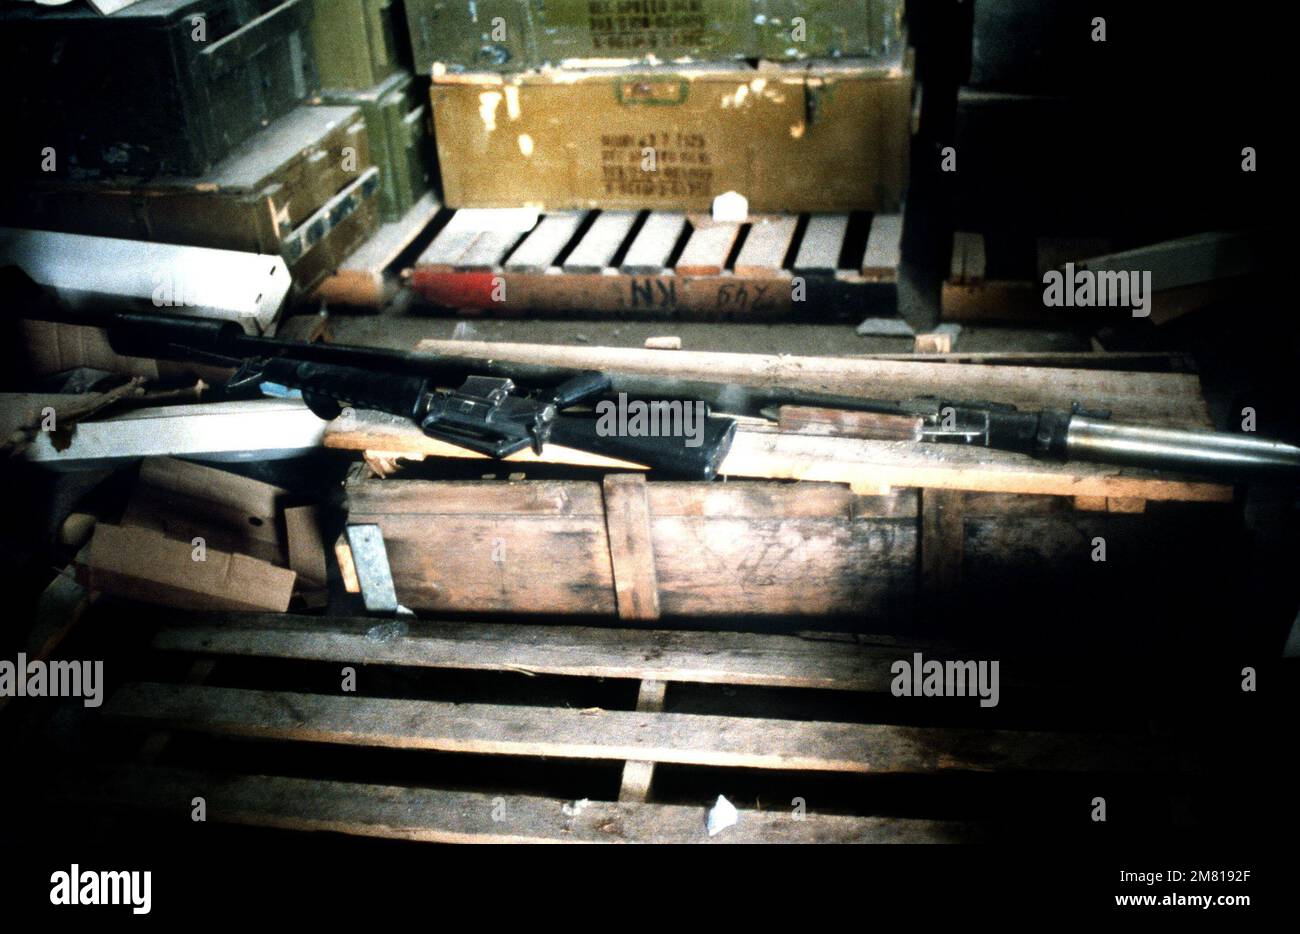 An M16A1 rifle is laid across crates containing Cuban weapons captured during Operation URGENT FURY. Subject Operation/Series: URGENT FURY Country: Grenada (GRD) Stock Photo